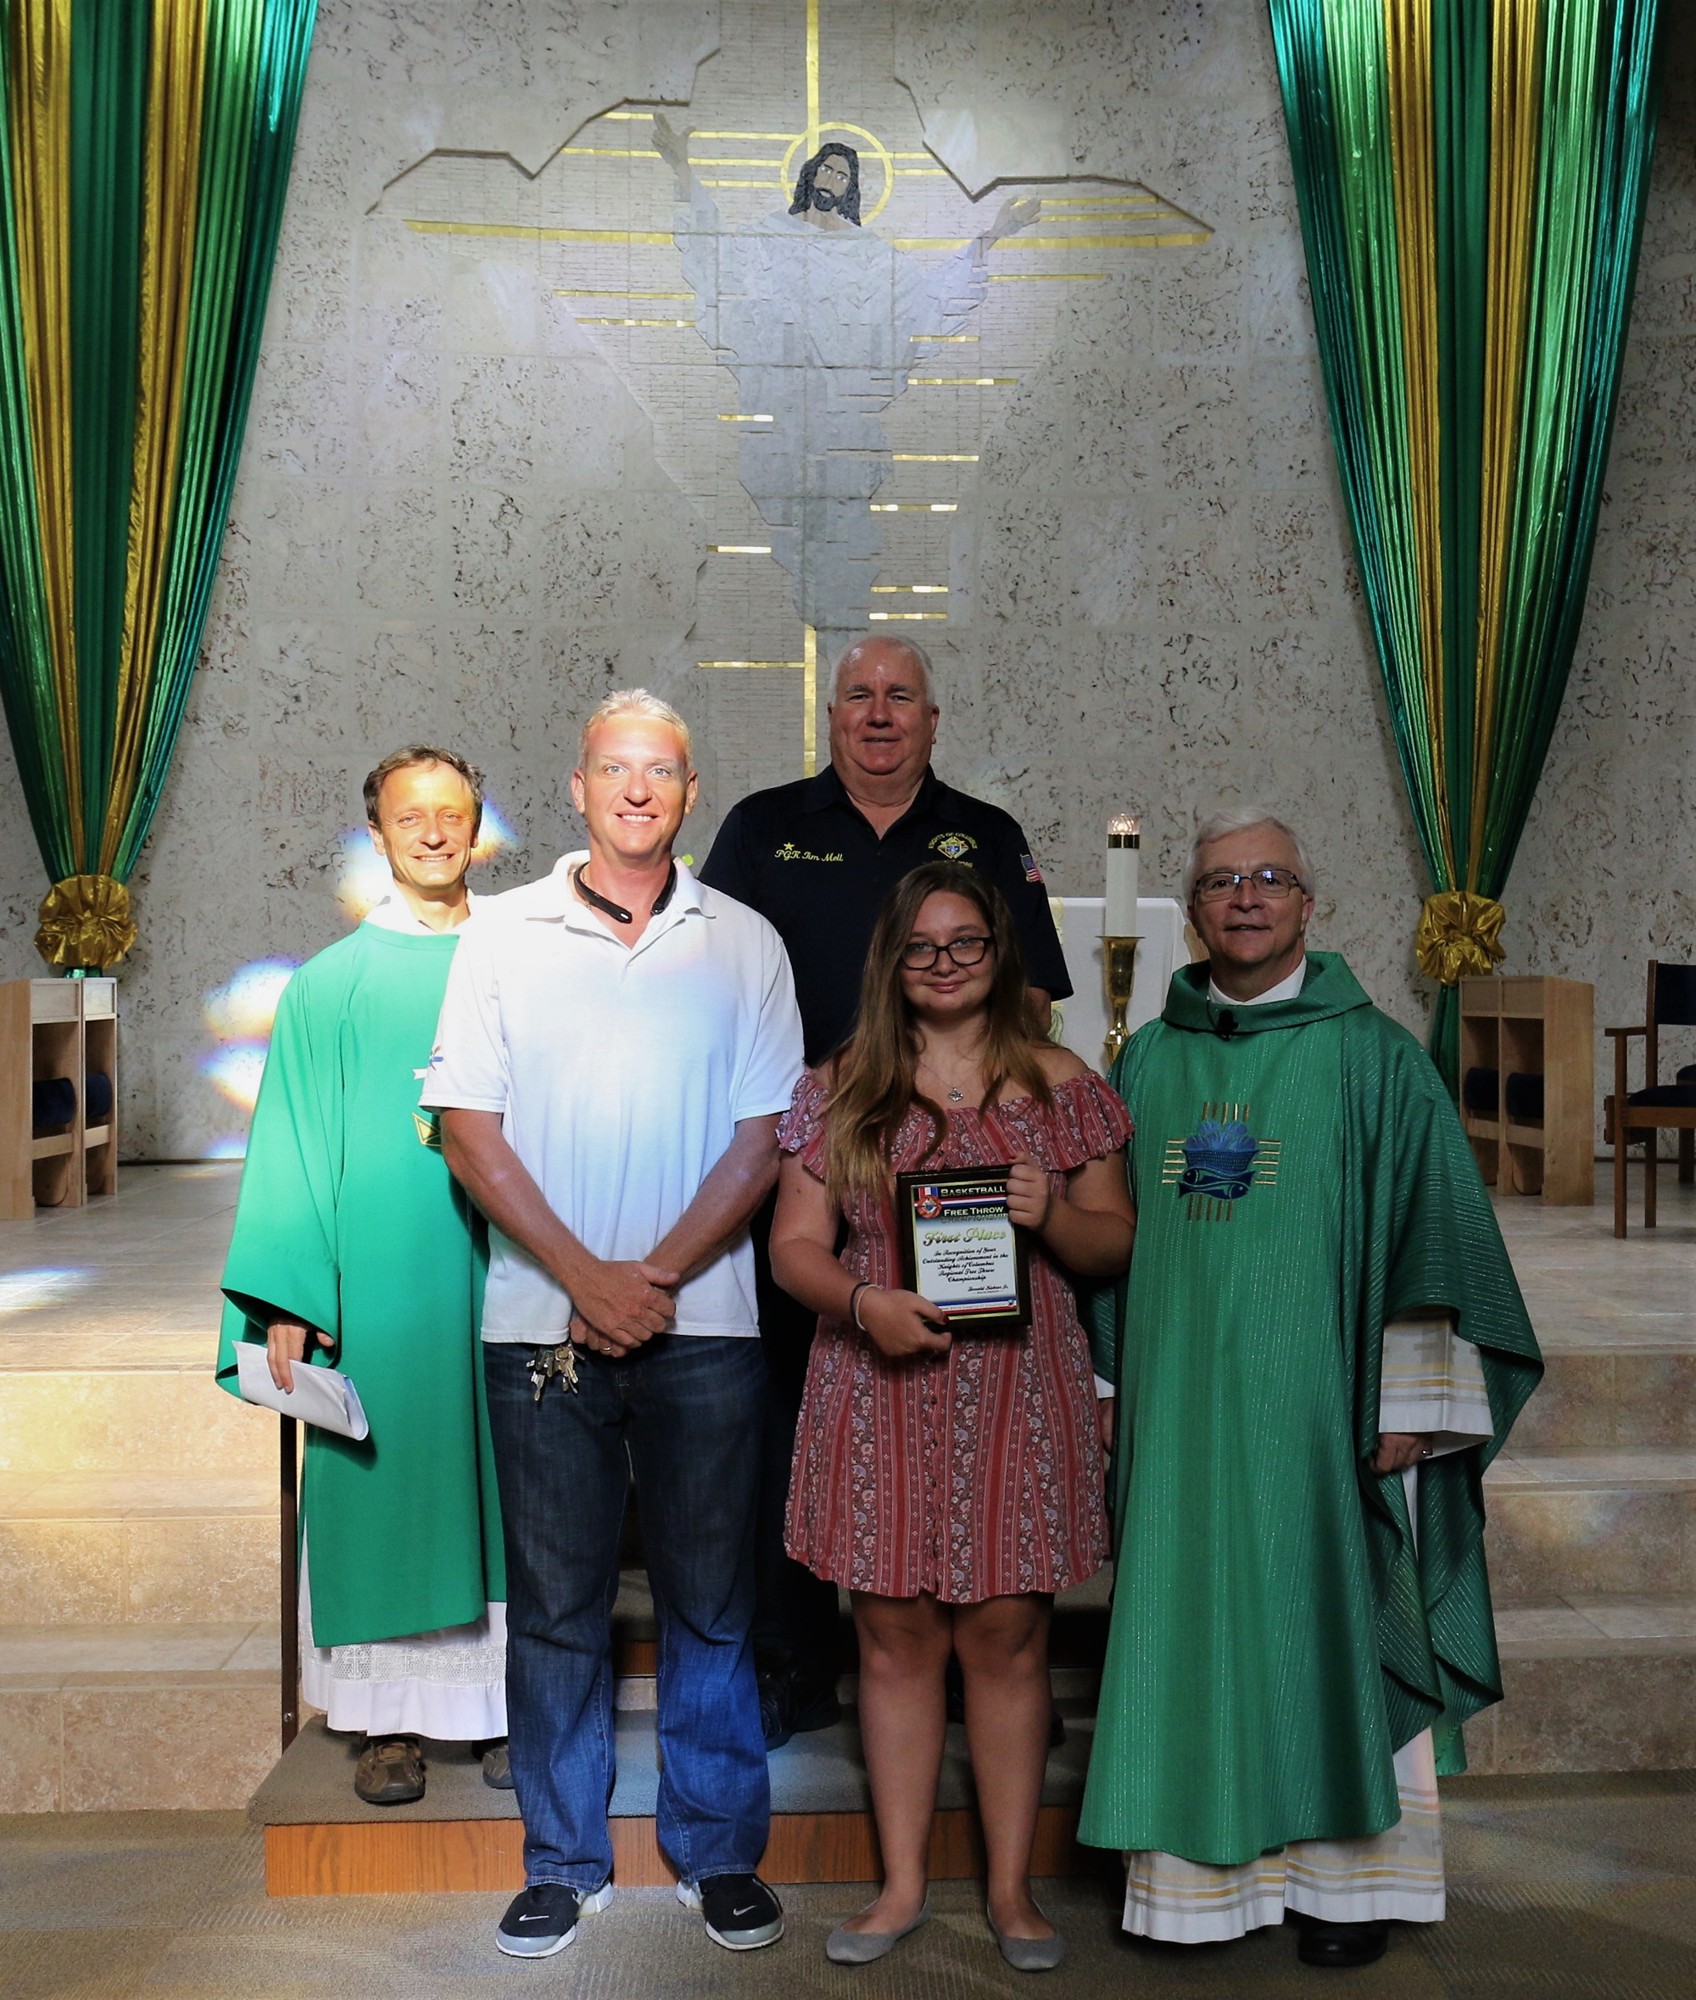 Pictured with Jessica Senft and her father, Tom, are Deacon Mike Rosolino, Fr Chris Hoffman and Grand Knight Tim Mell.